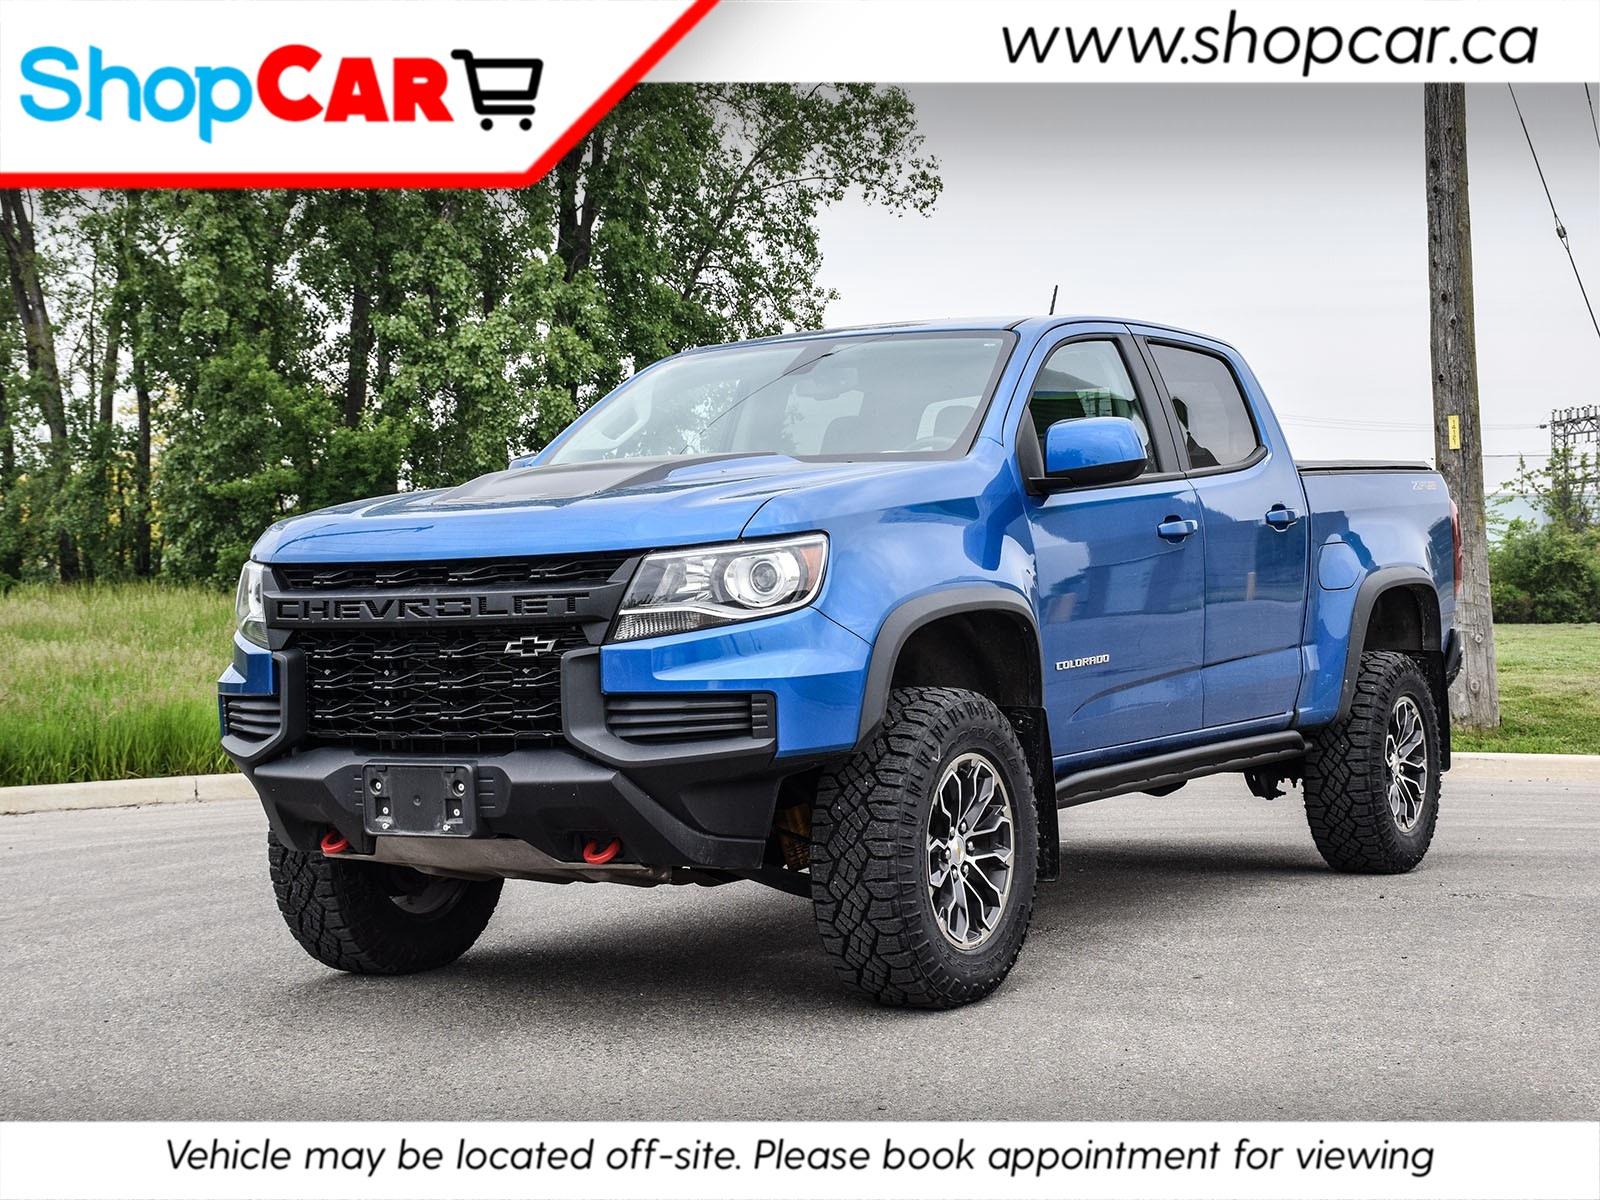 2022 Chevrolet Colorado New Arrival | 4x4 | Low KMs | Clean CarFax